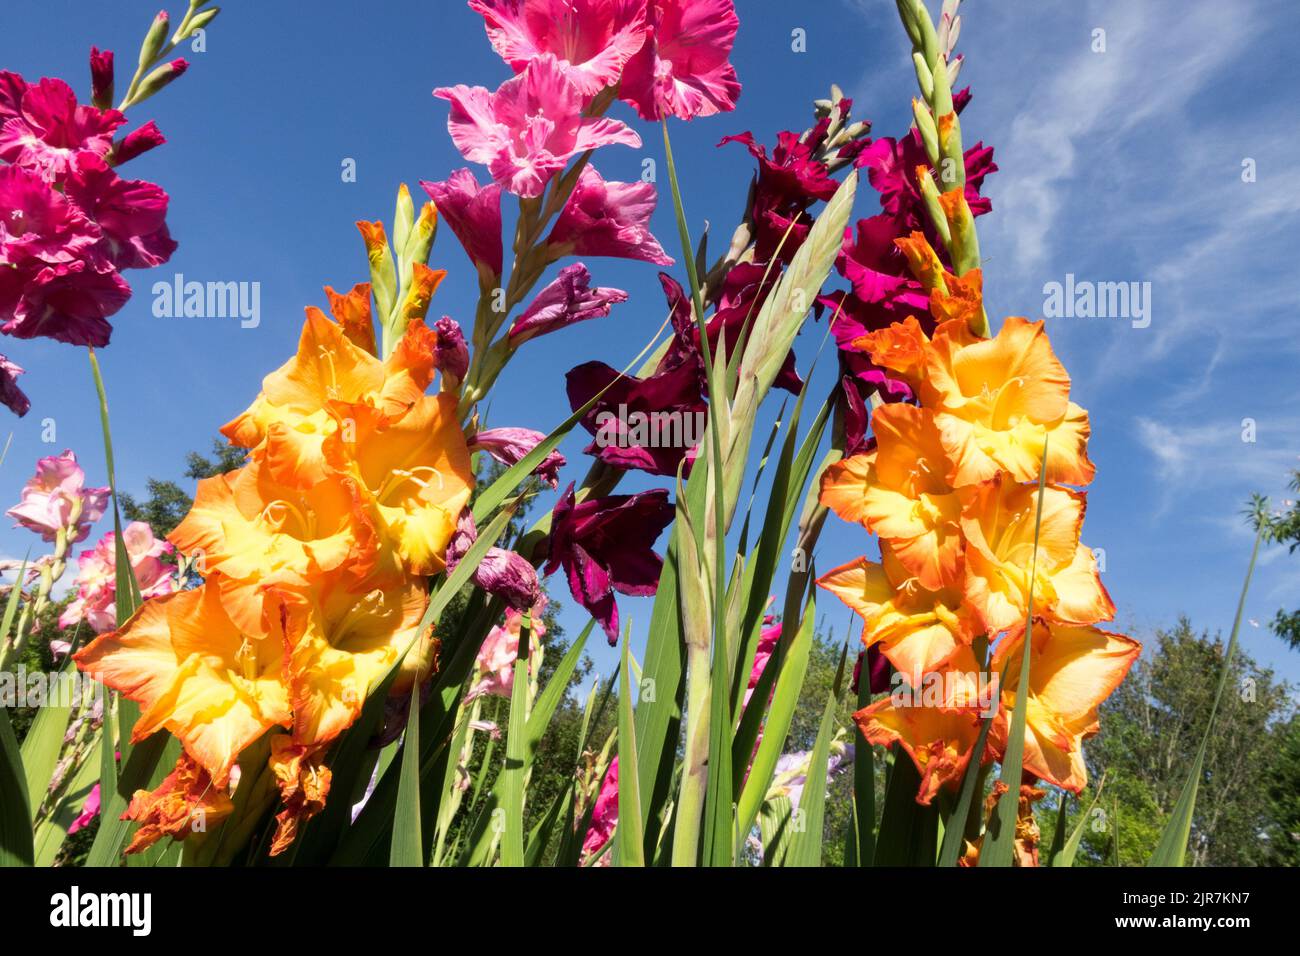 Colourful gladioli garden Gladiolus orange flowers summer plants suitable for cutting to a vase Stock Photo